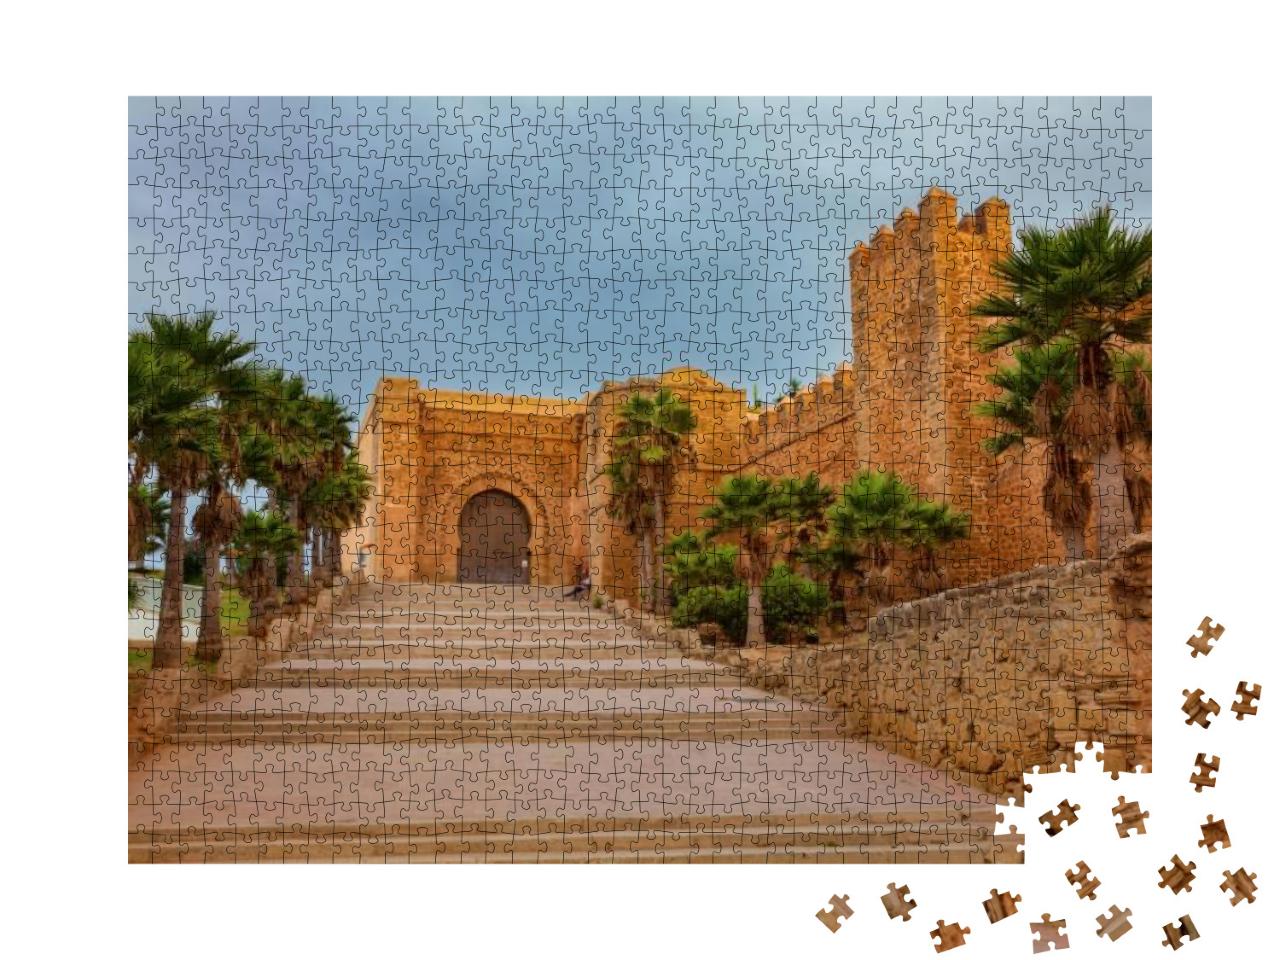 Bab El Kebir, Main Gate of Kasbah of the Udayas, Small Fo... Jigsaw Puzzle with 1000 pieces